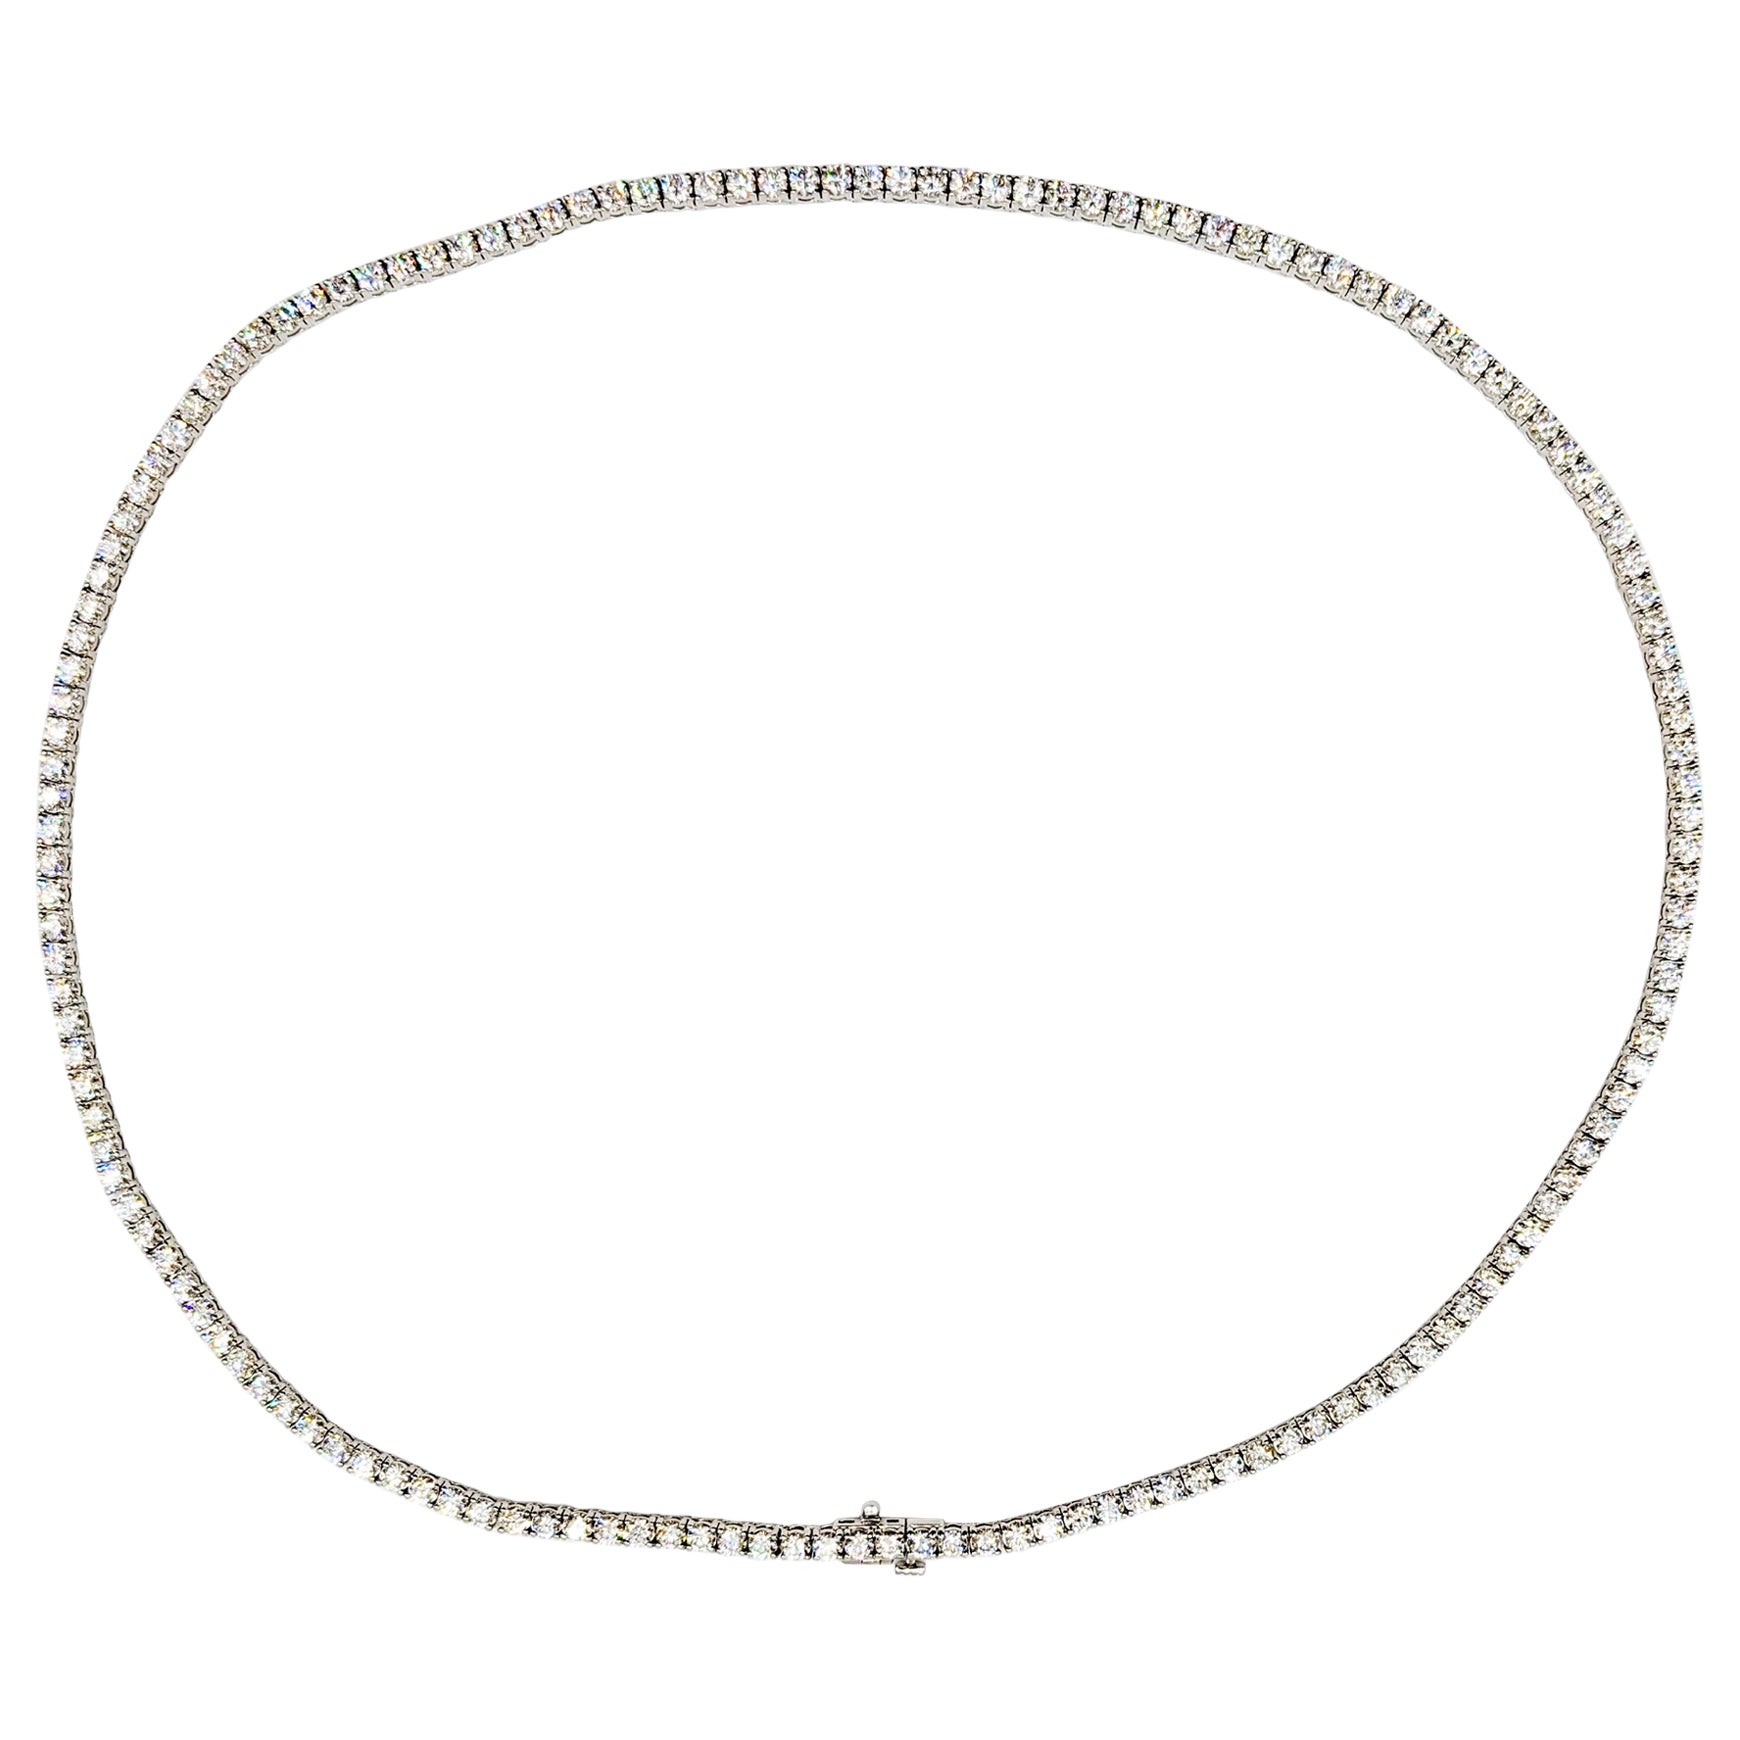 Beautiful 16.88ctw Natural Diamond Tennis Necklace in 14Kt White Gold